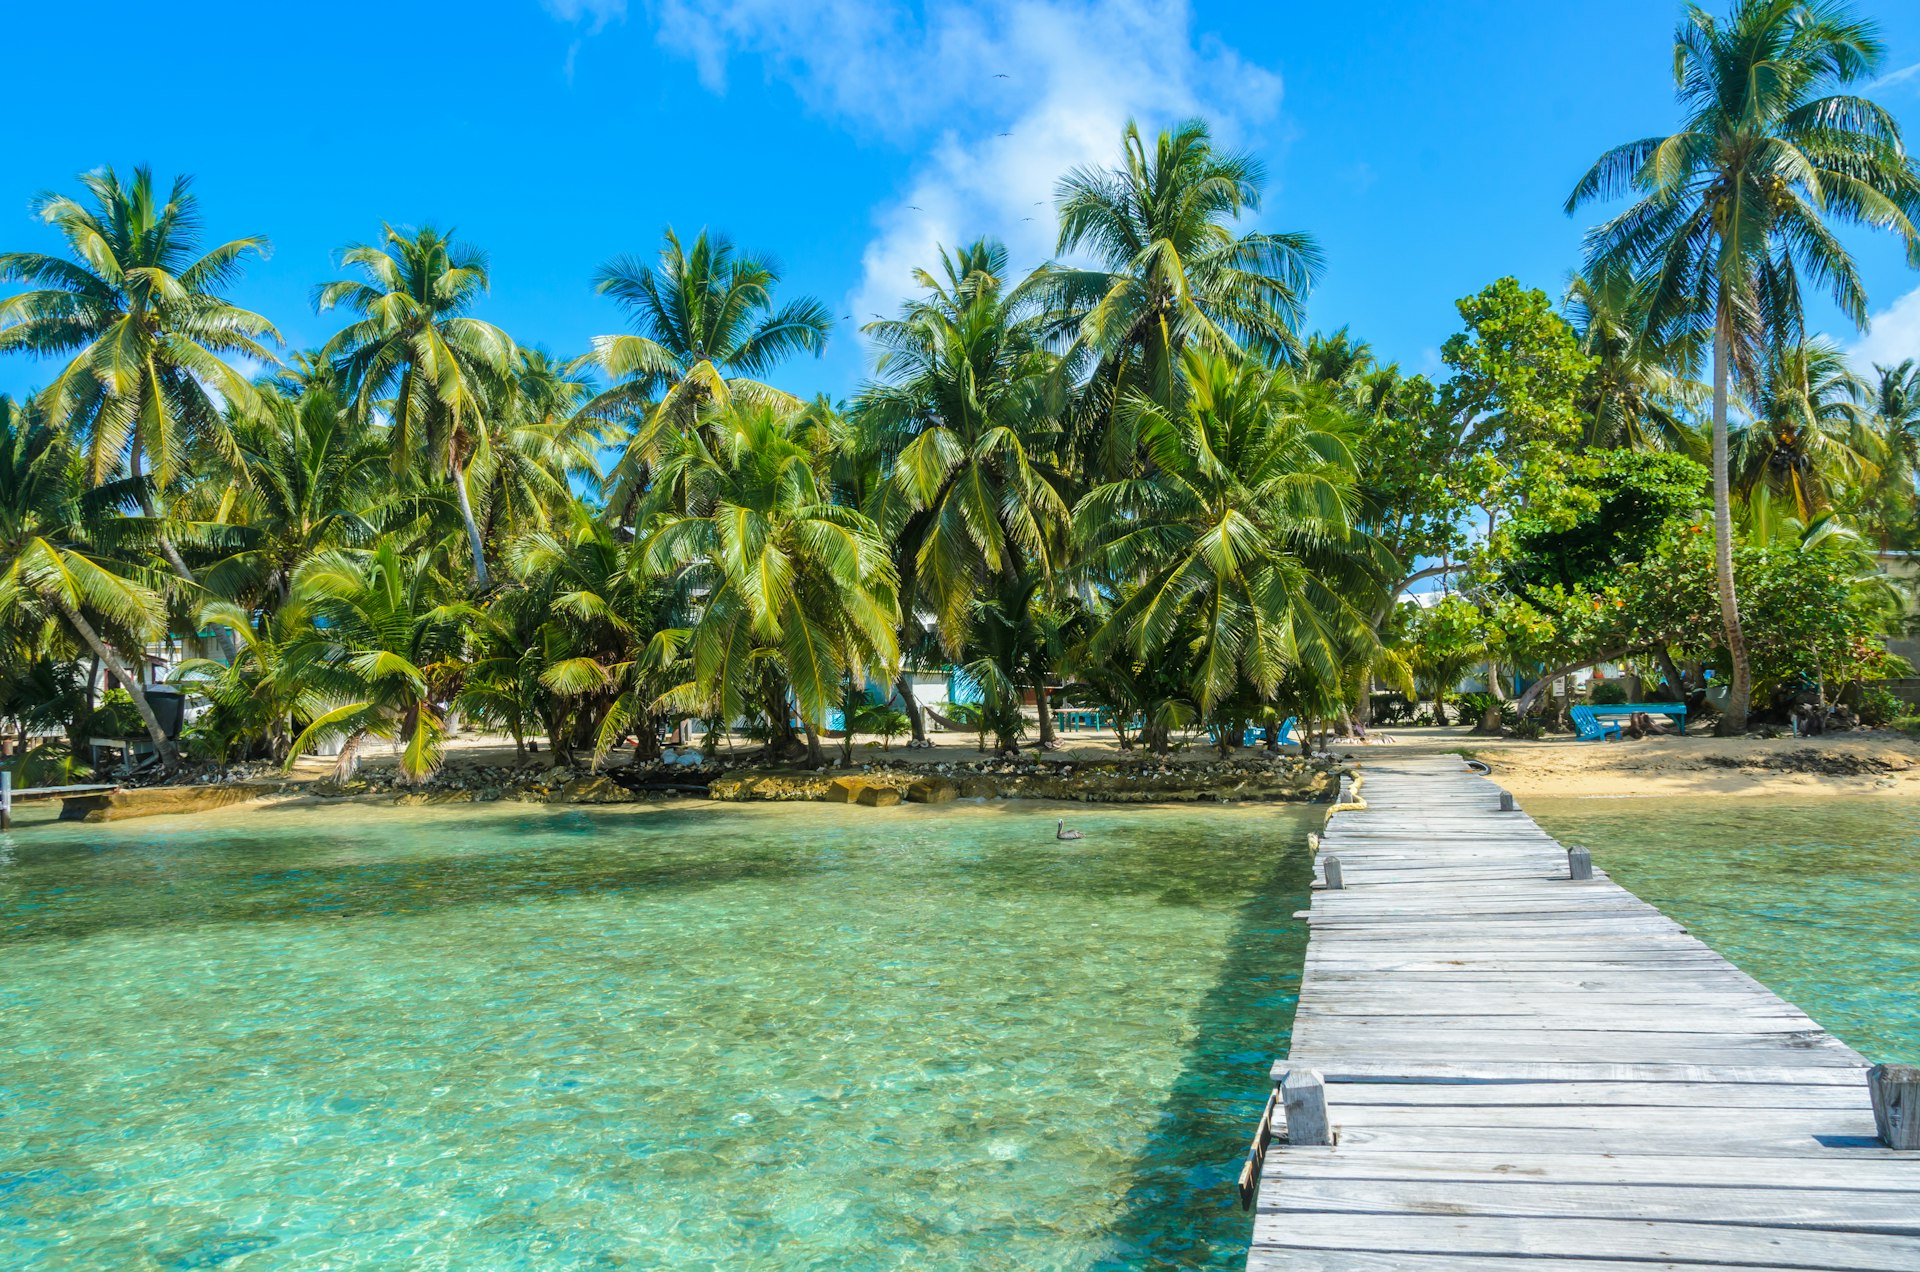 A wooden boardwalk across shallow blue-green water leading towards a palm-fringed beach at Tobacco Caye, Belize